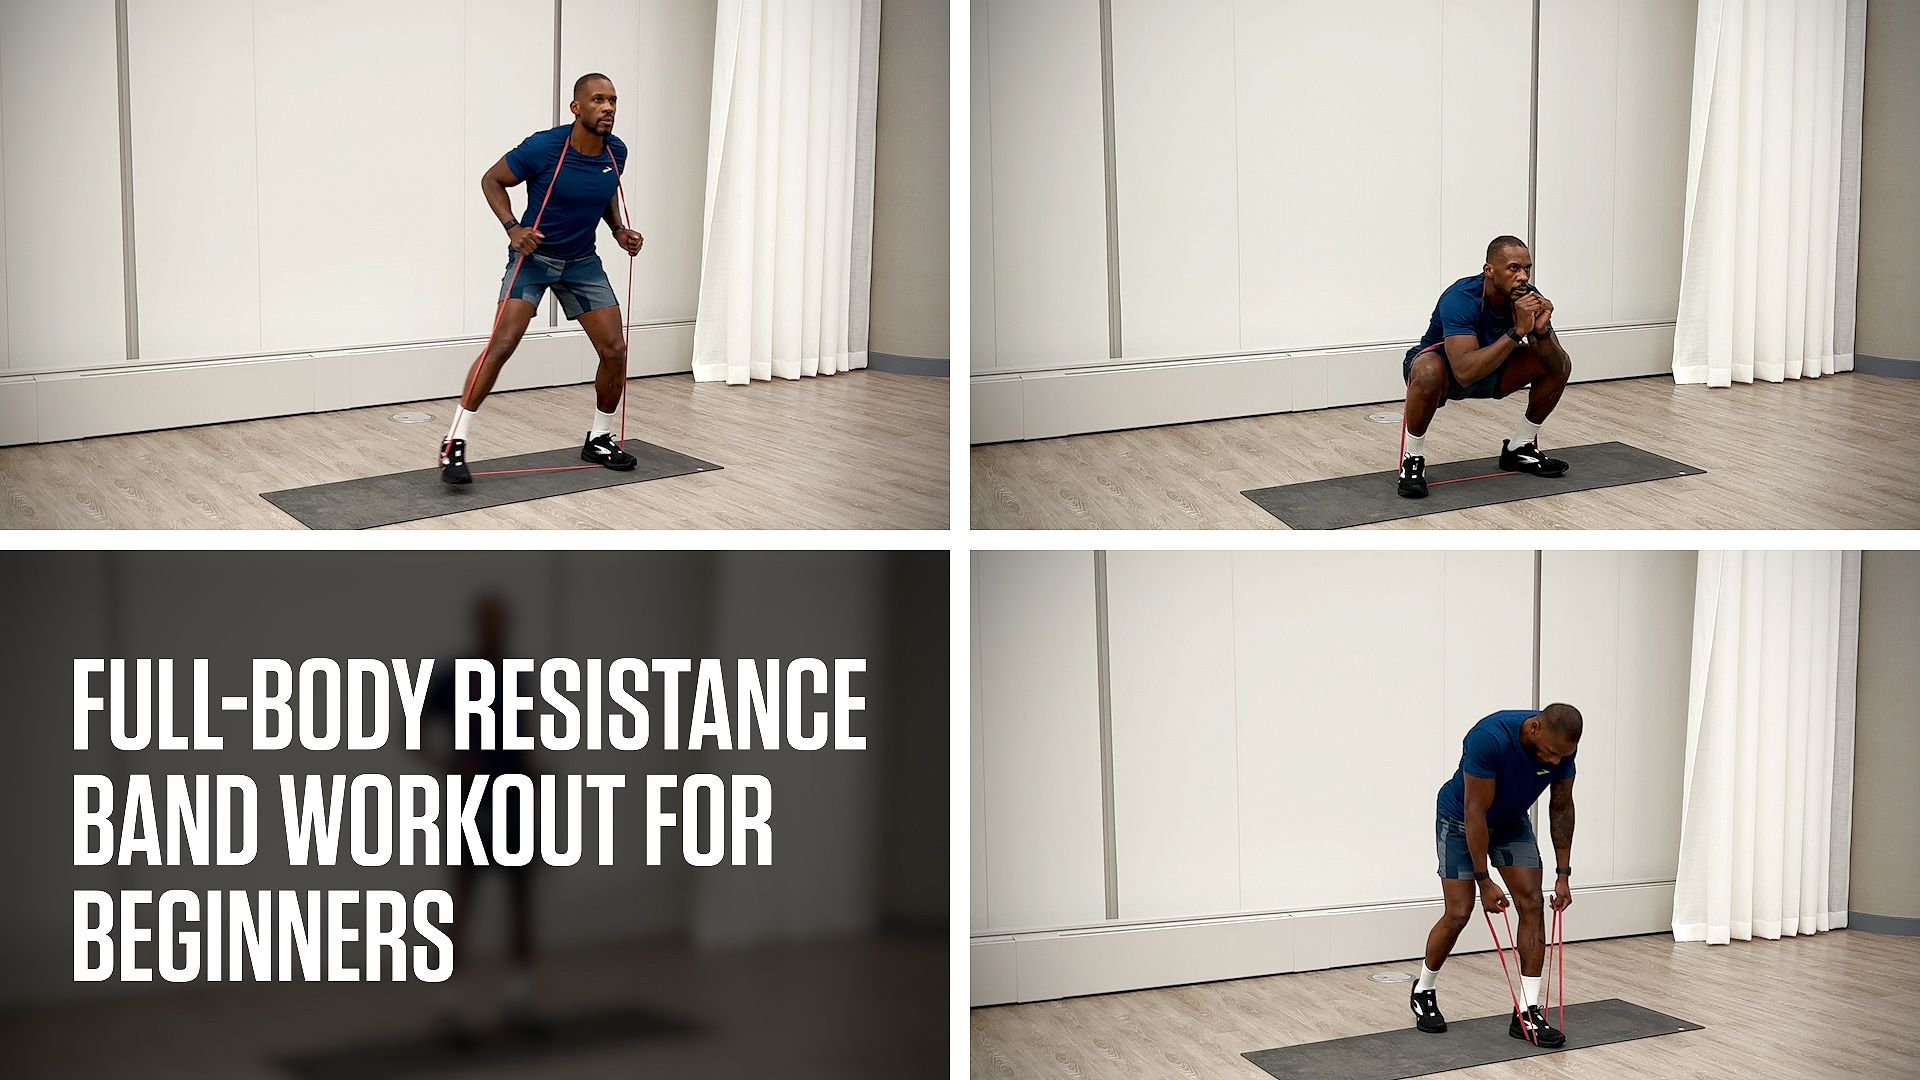 Resistance Band Exercises for Beginners